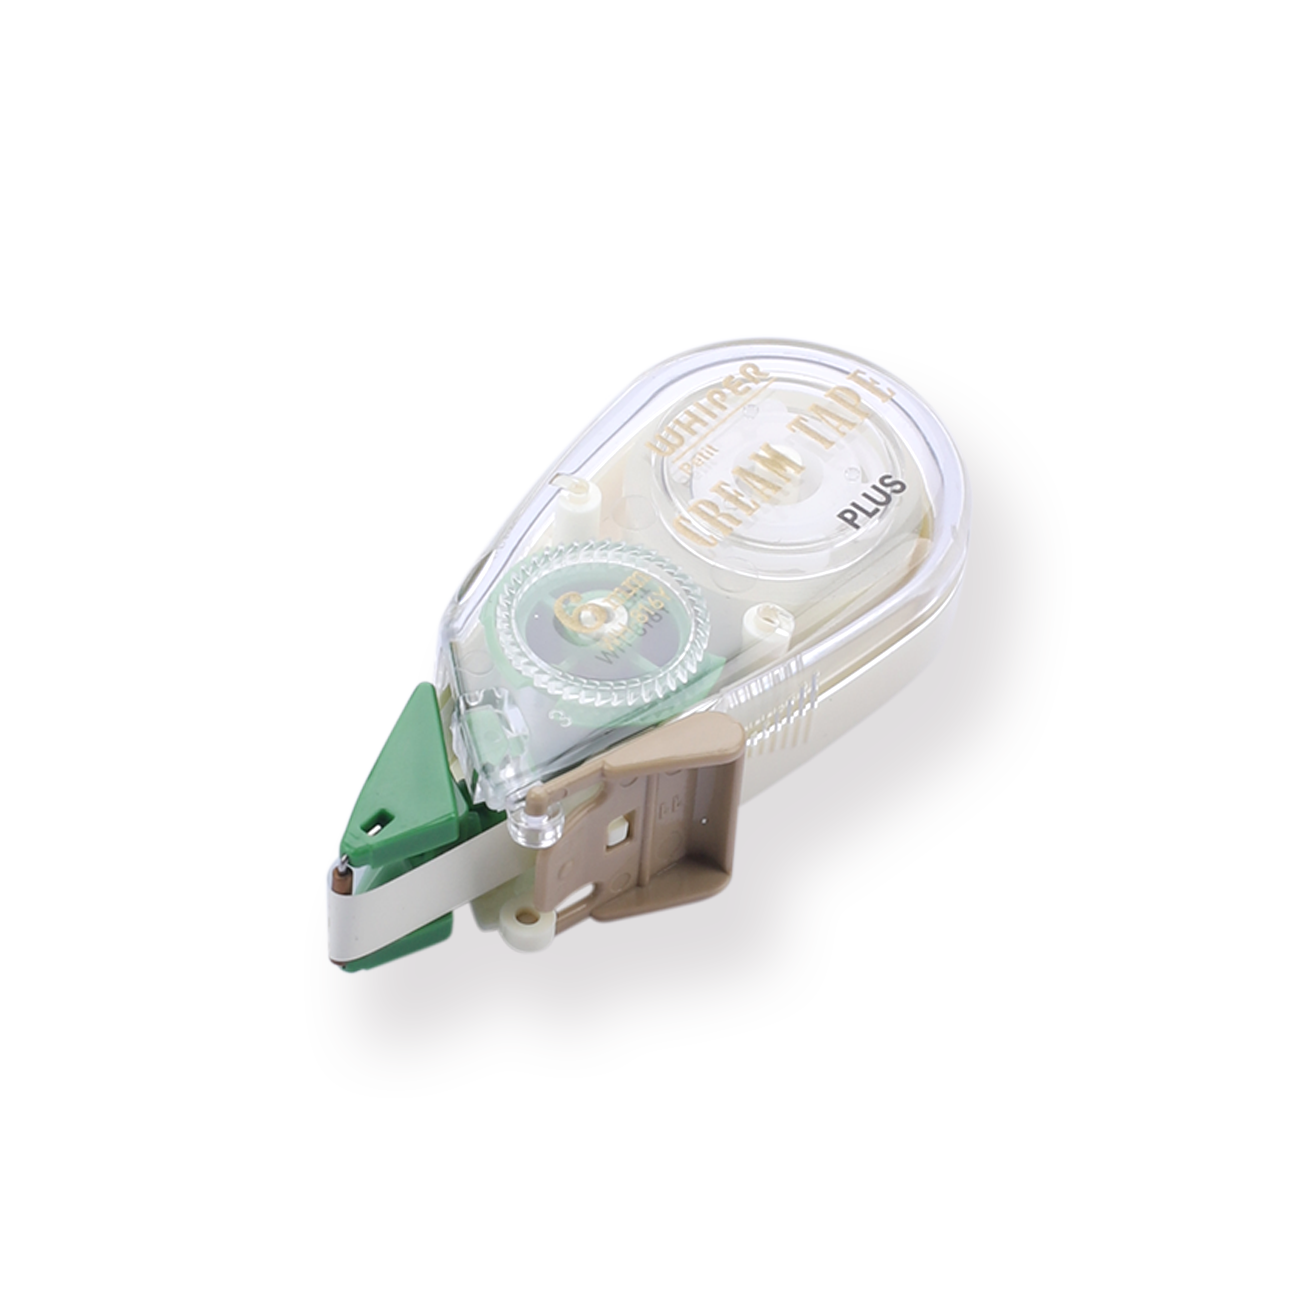 Plus Whiper Cream Correction Tape - Green - Stationery Pal